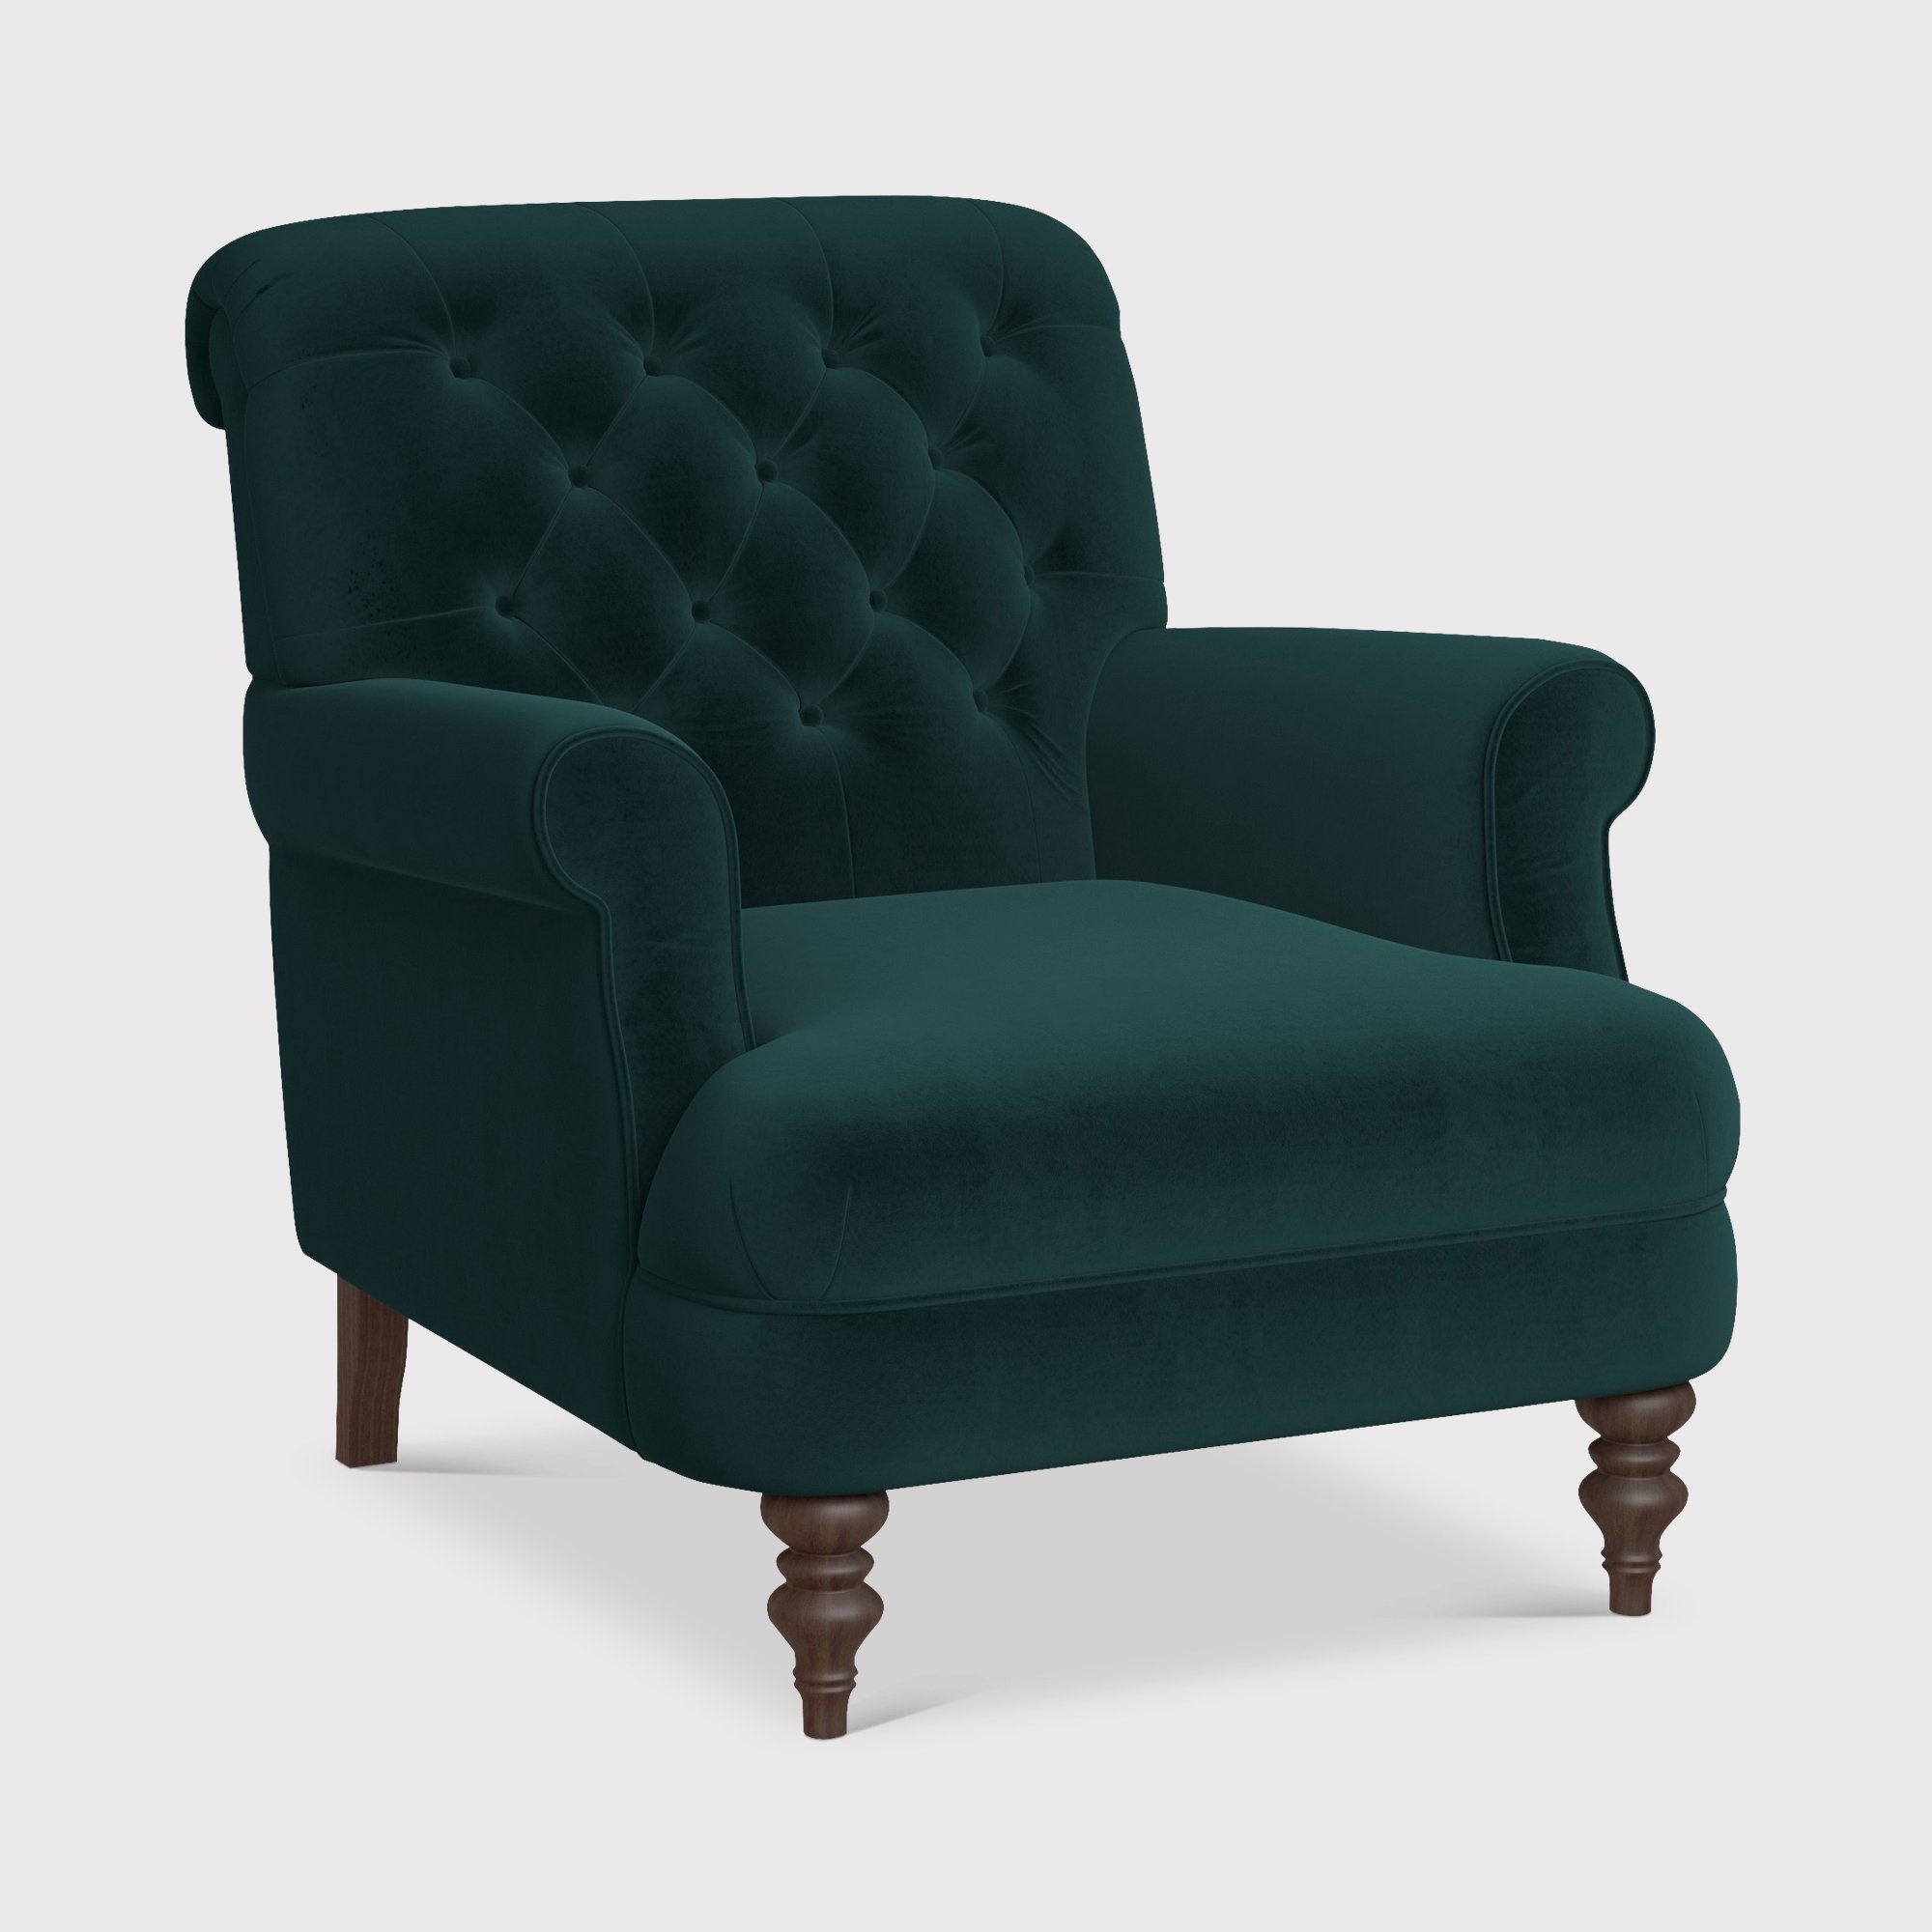 Windermere Accent Chair, Green Fabric | Barker & Stonehouse